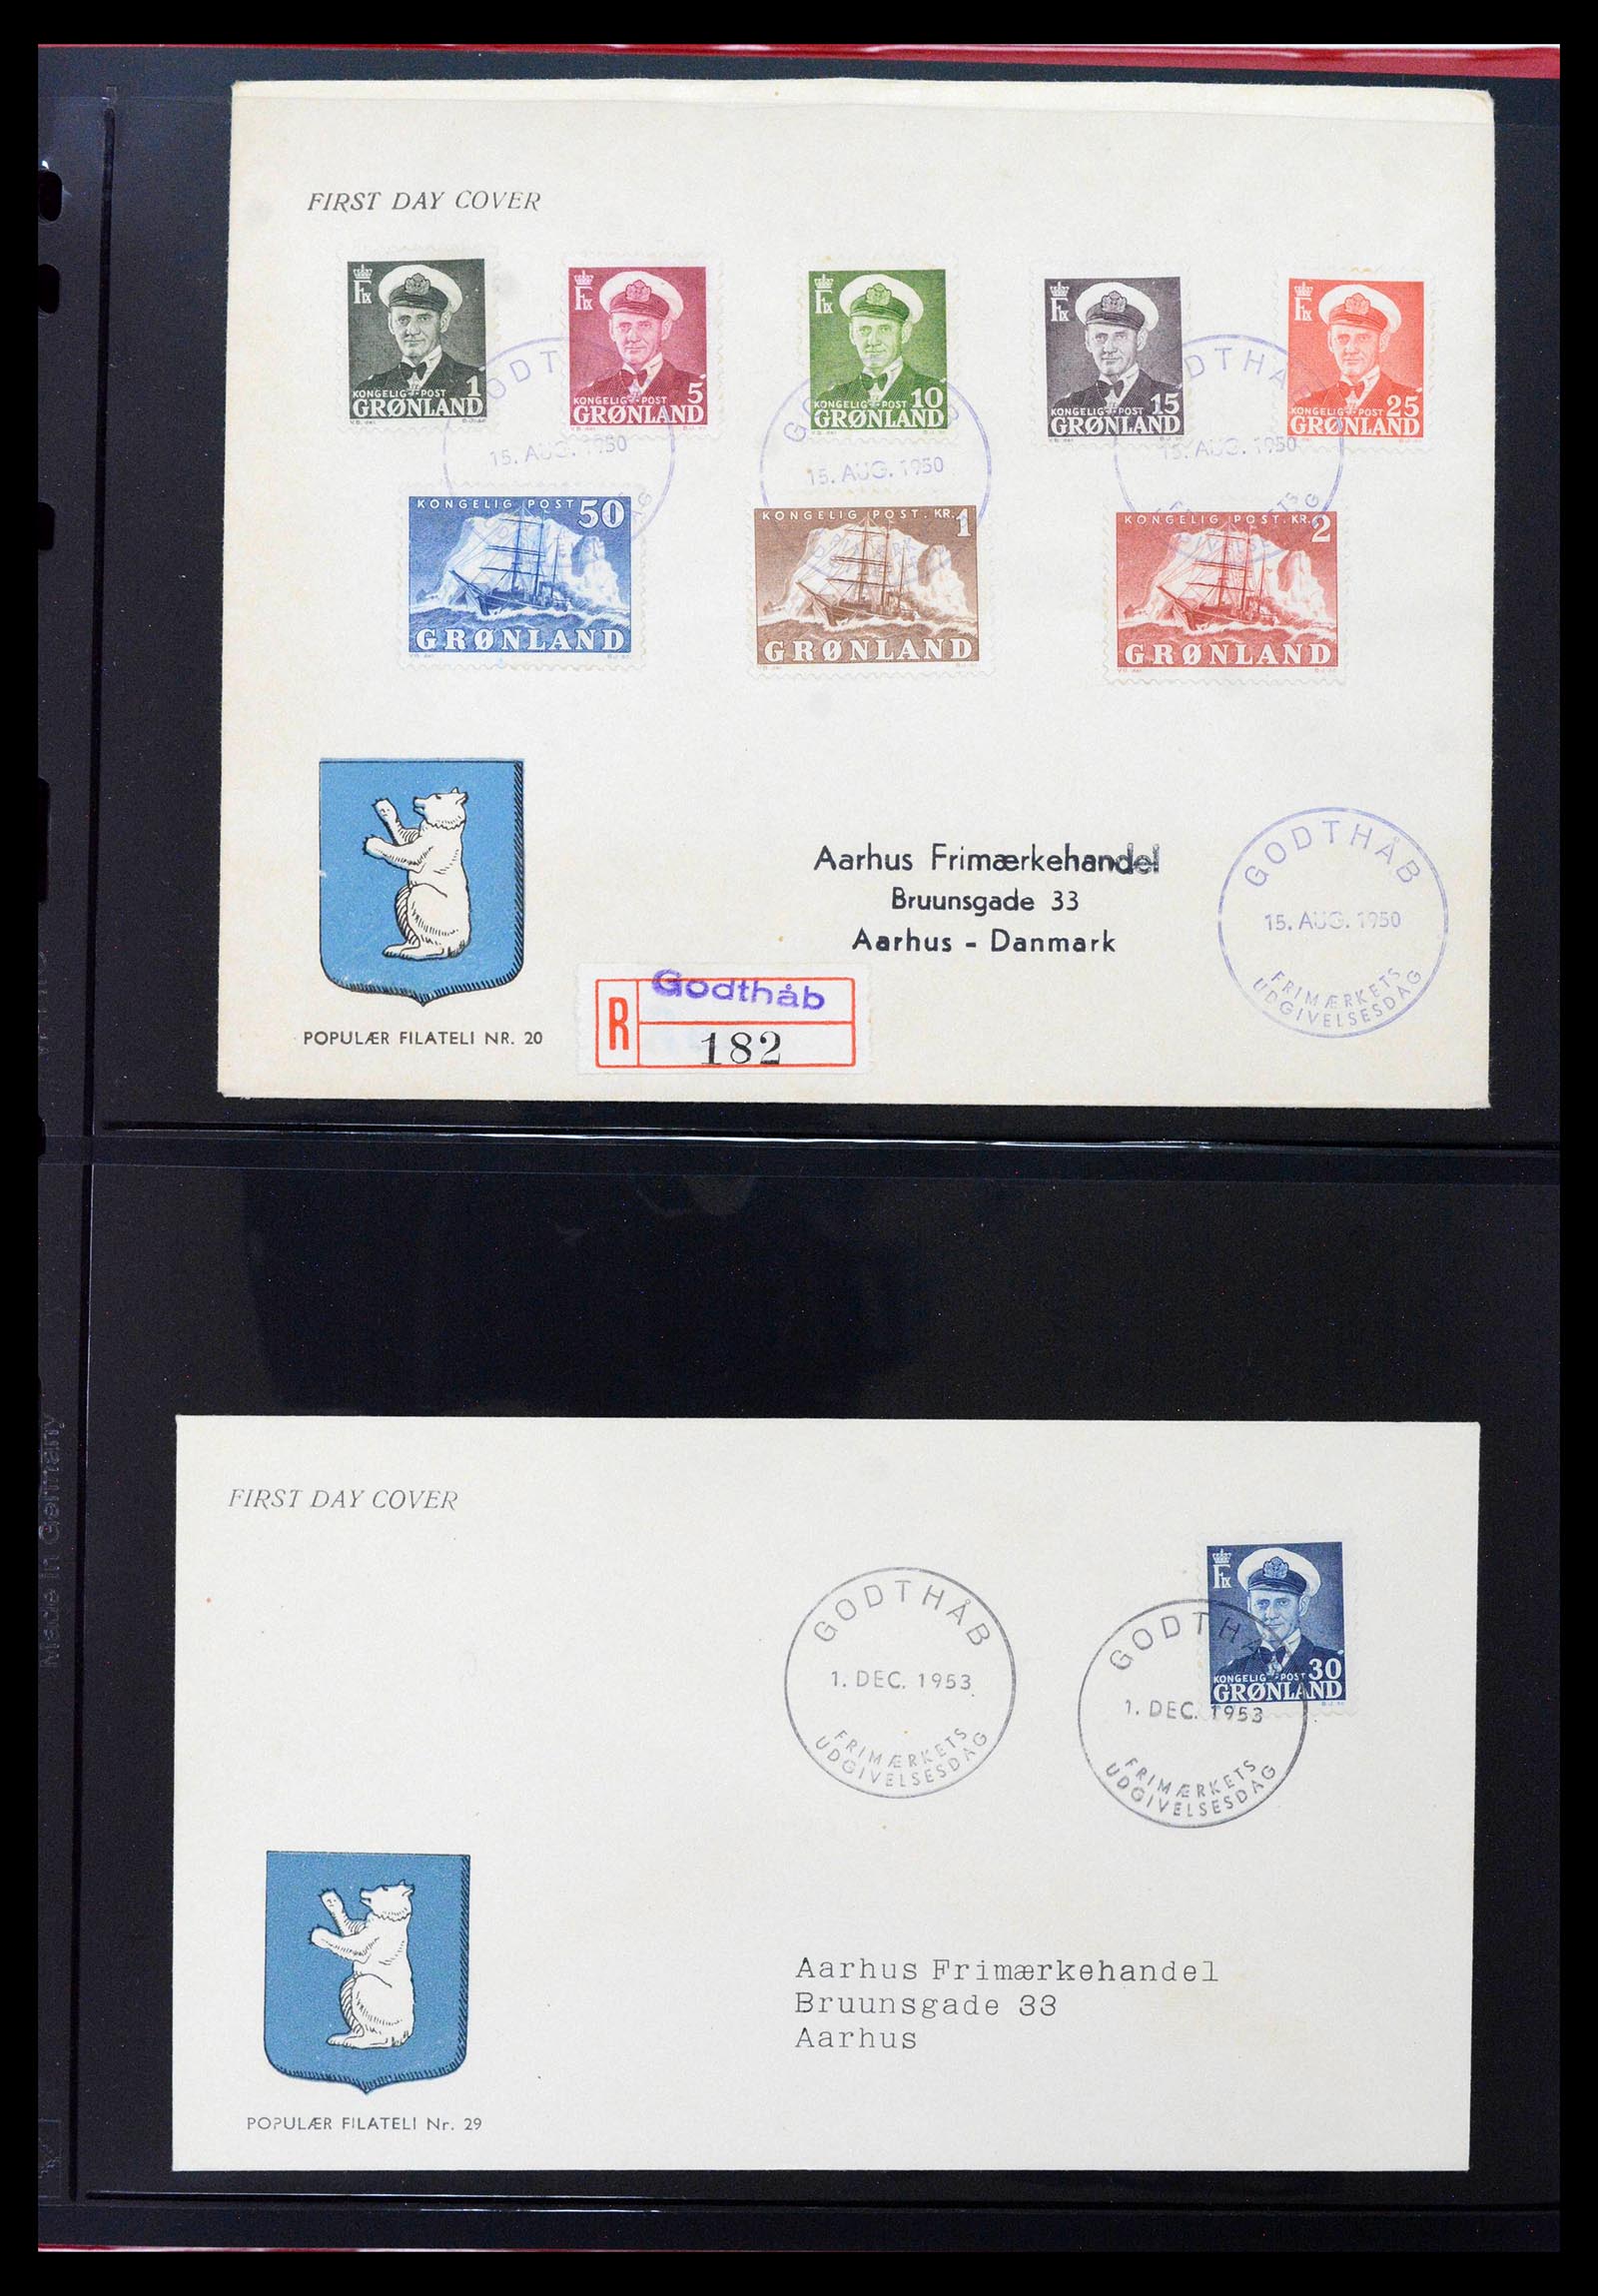 38824 0001 - Stamp collection 38824 Greenland first day covers 1950-2017.